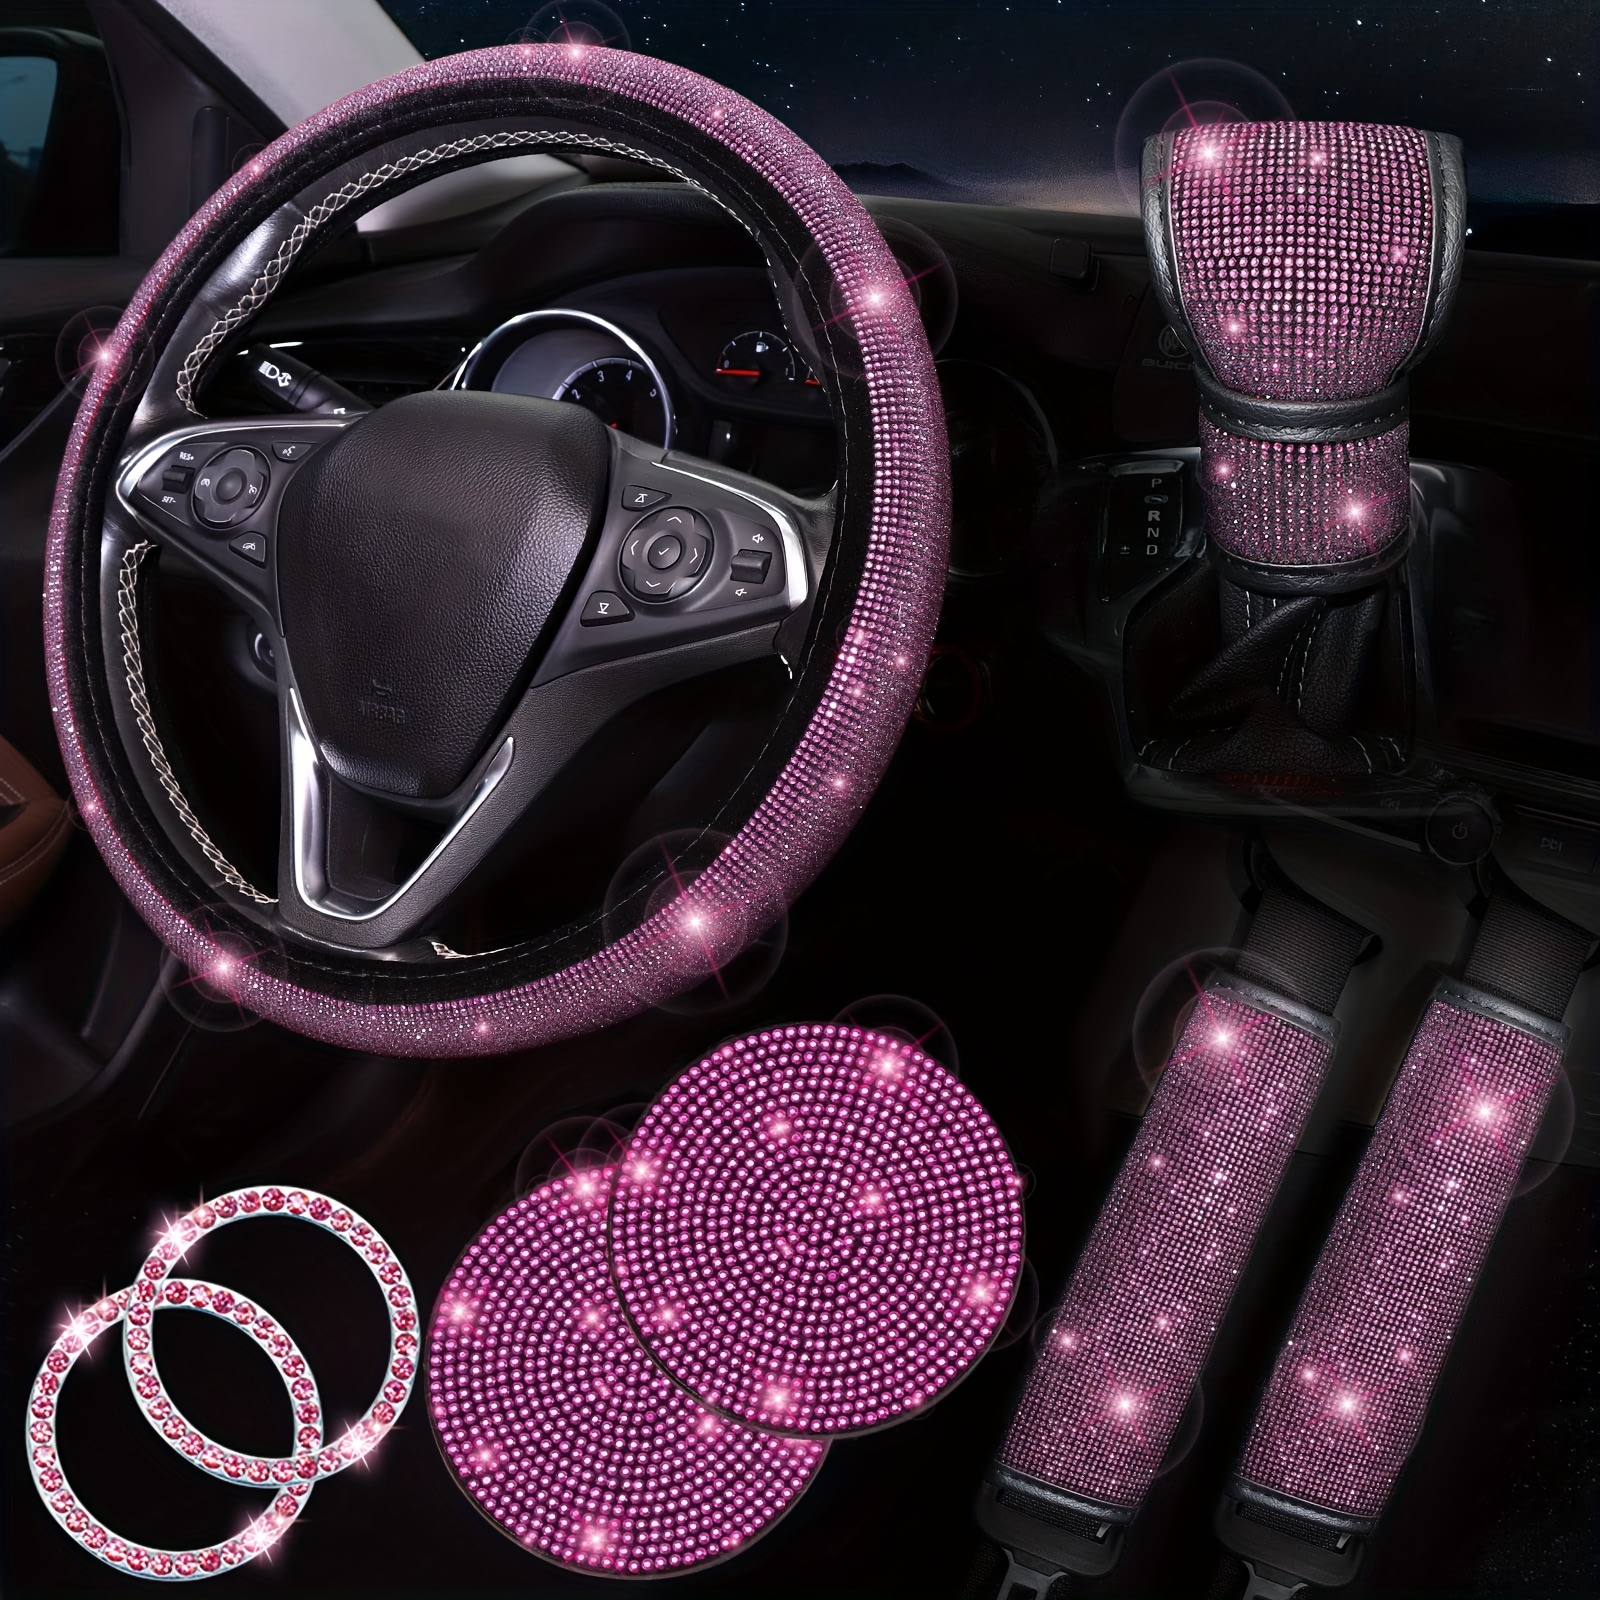 

8 Pcs Bling Car Accessories Set For Women, Bling Rhinestone Diamond Steering Wheel Cover, Sparkly Seat Belt Covers, Bling Gear Shift Cover, Universal Fit Most Cars